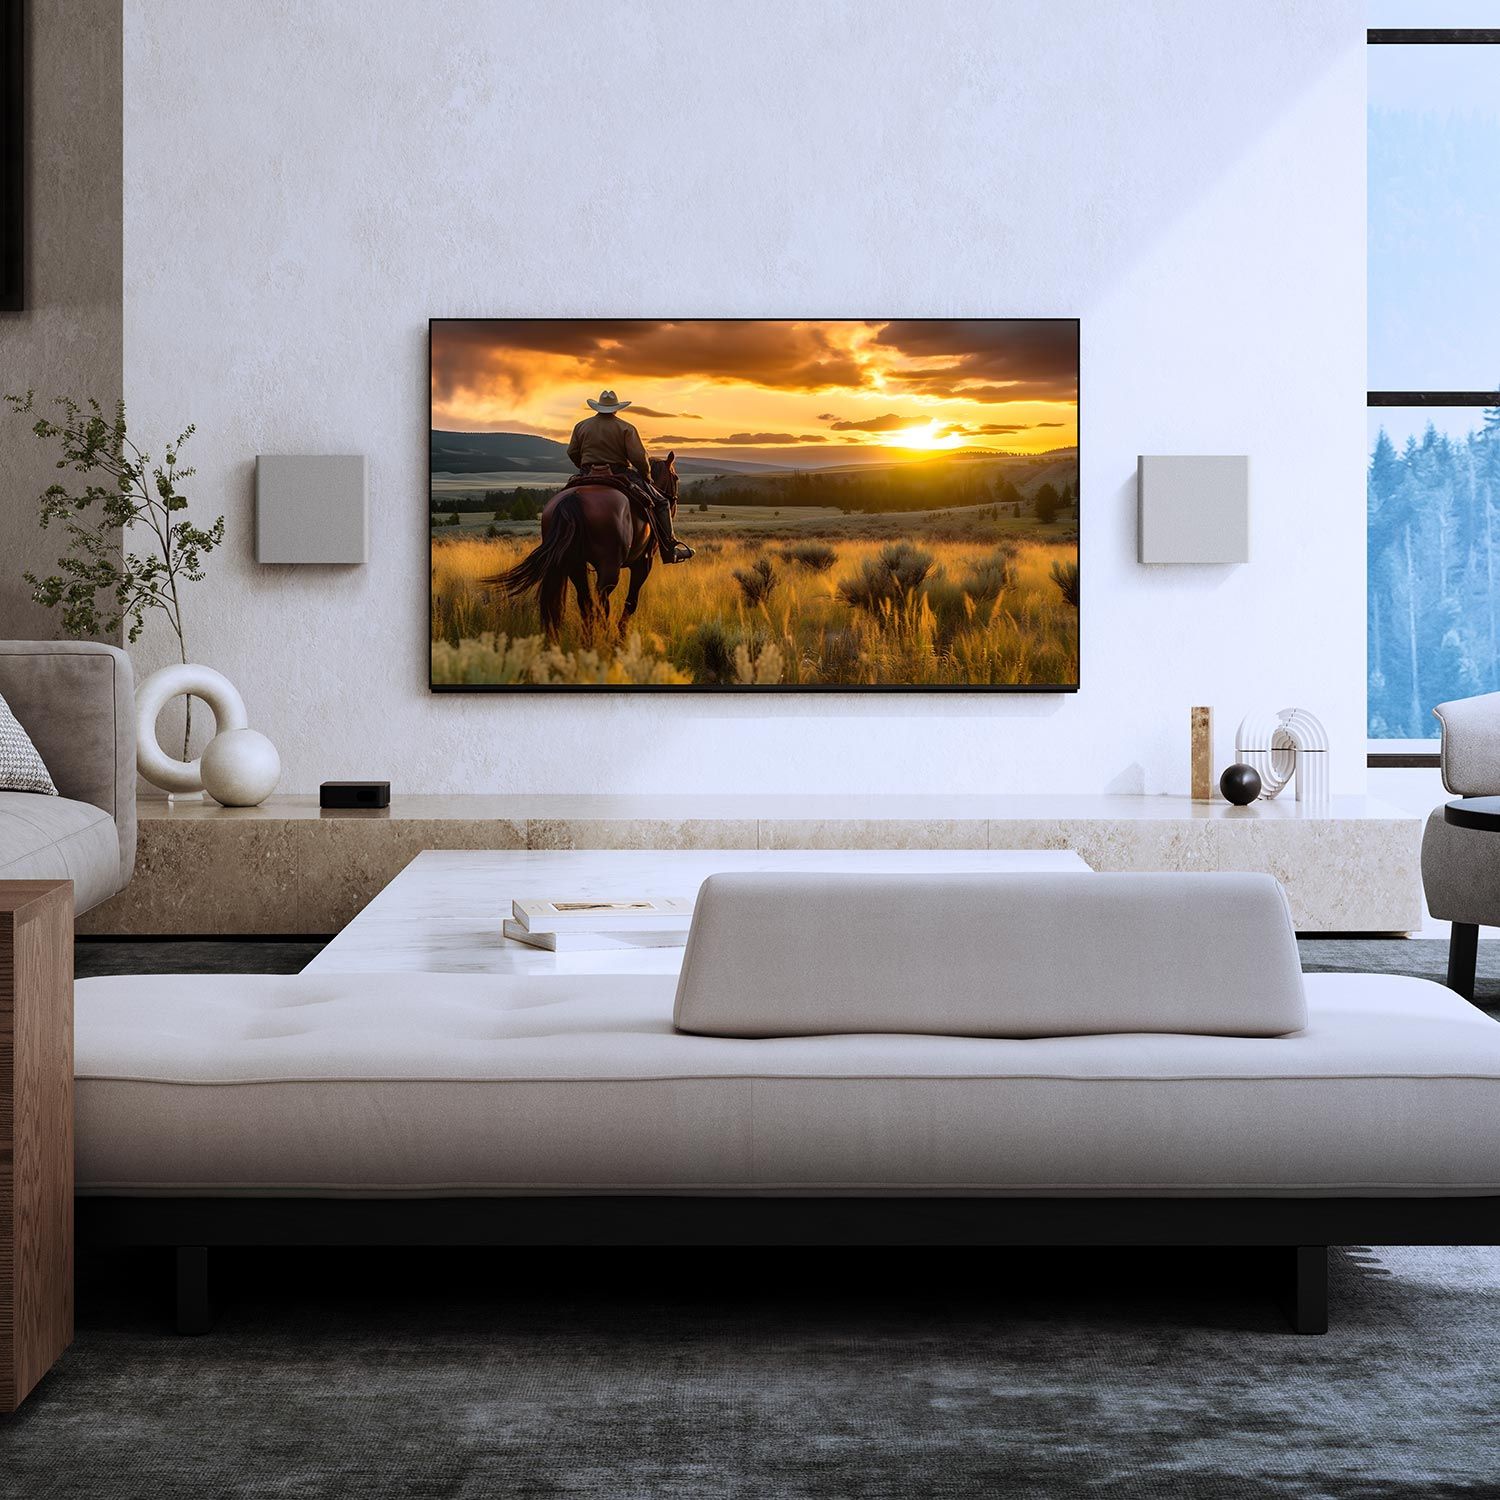 A modern living room with a large Sony TV displaying a sunset scene and minimalistic furniture.